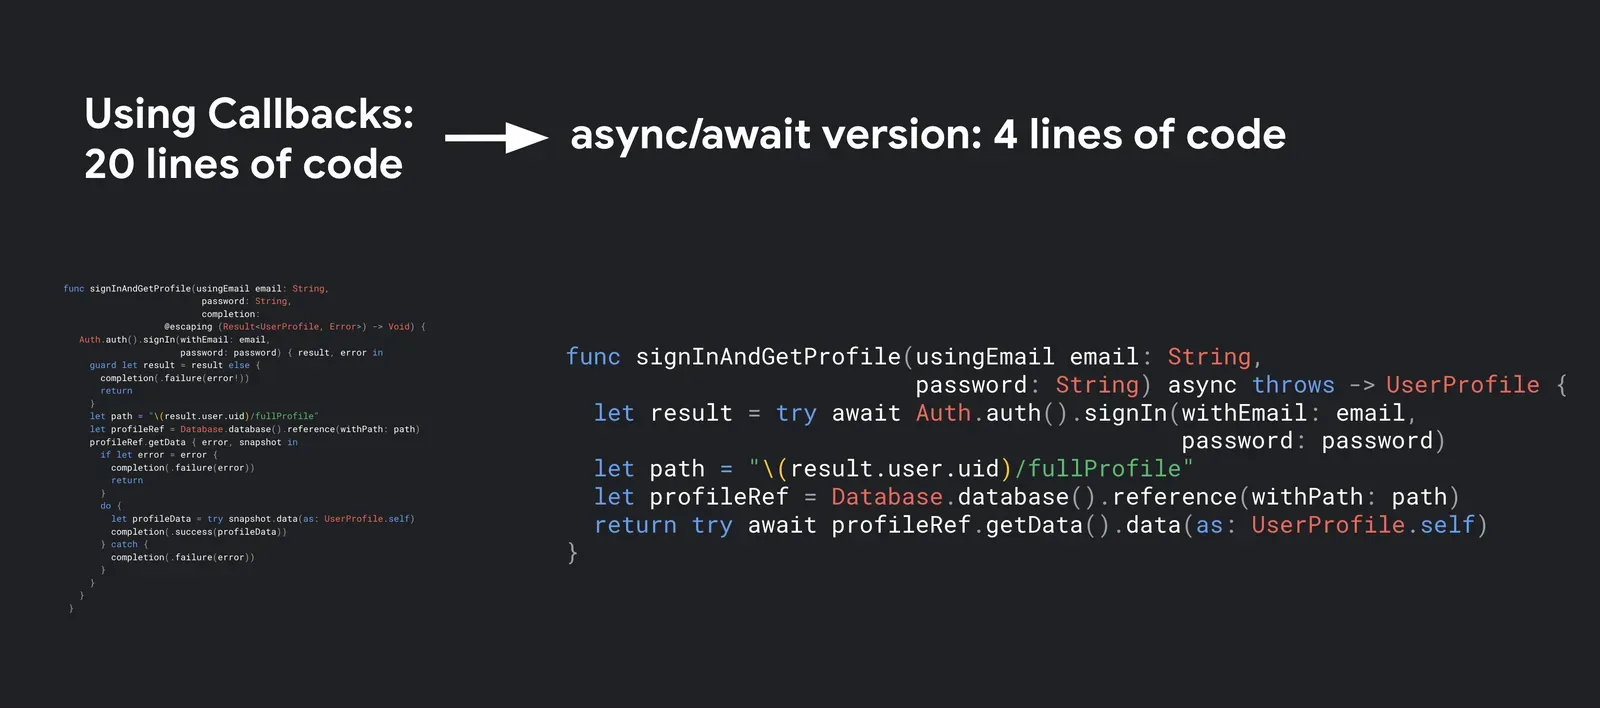 A long heavily indented 20 line code sample in Swift, compared to a sample that achieves the same goal in 4 lines of code using async/await.